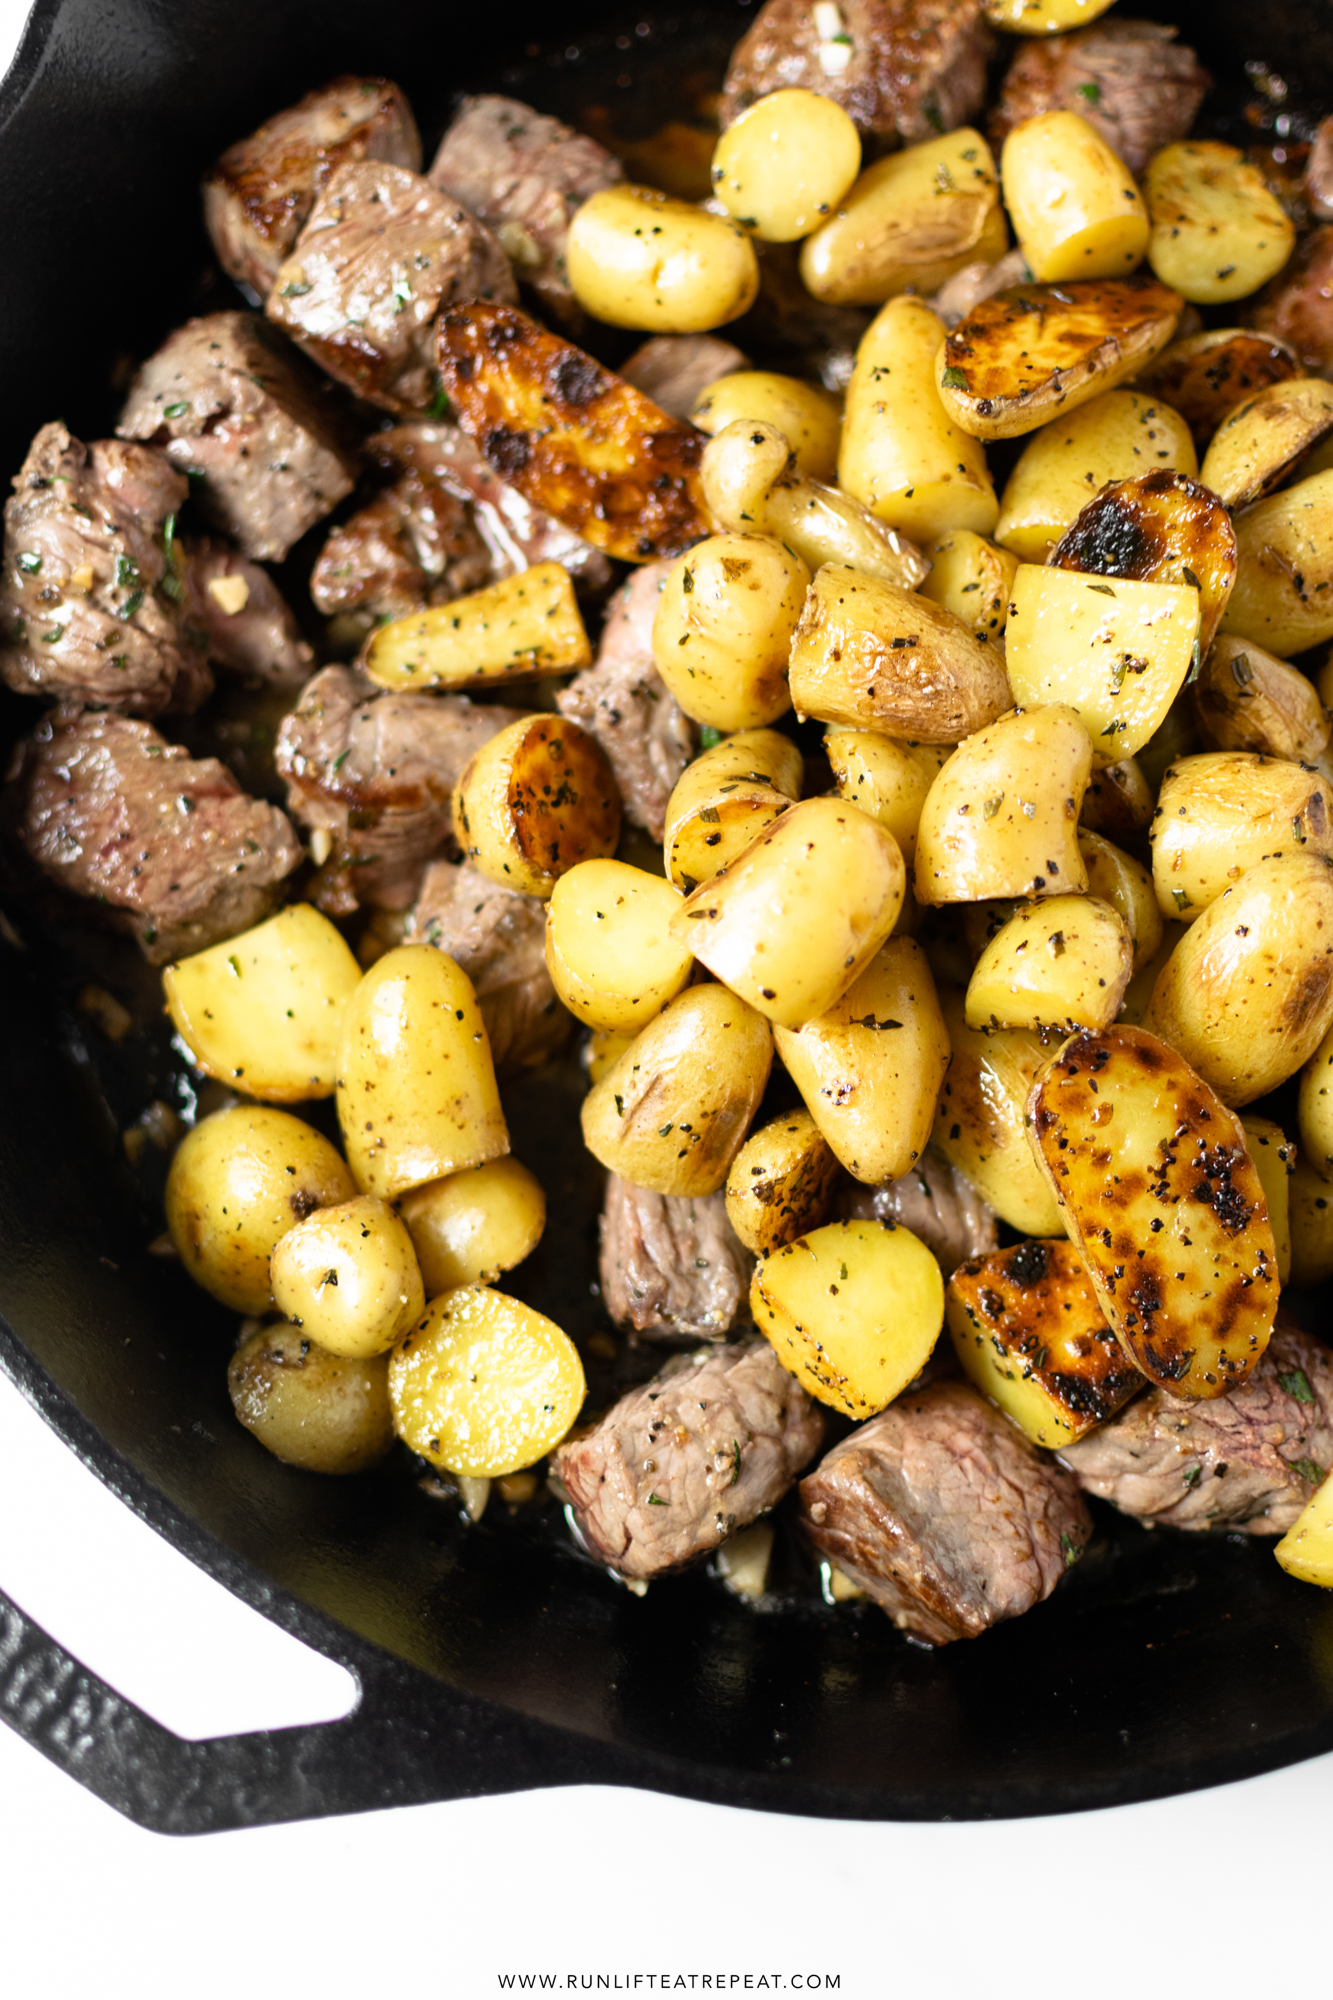 These garlic herb butter steak bites with potatoes are an incredibly simple meal that is flavor packed and made in one pan. Paired with a salad, this is a meal that the entire family with love!